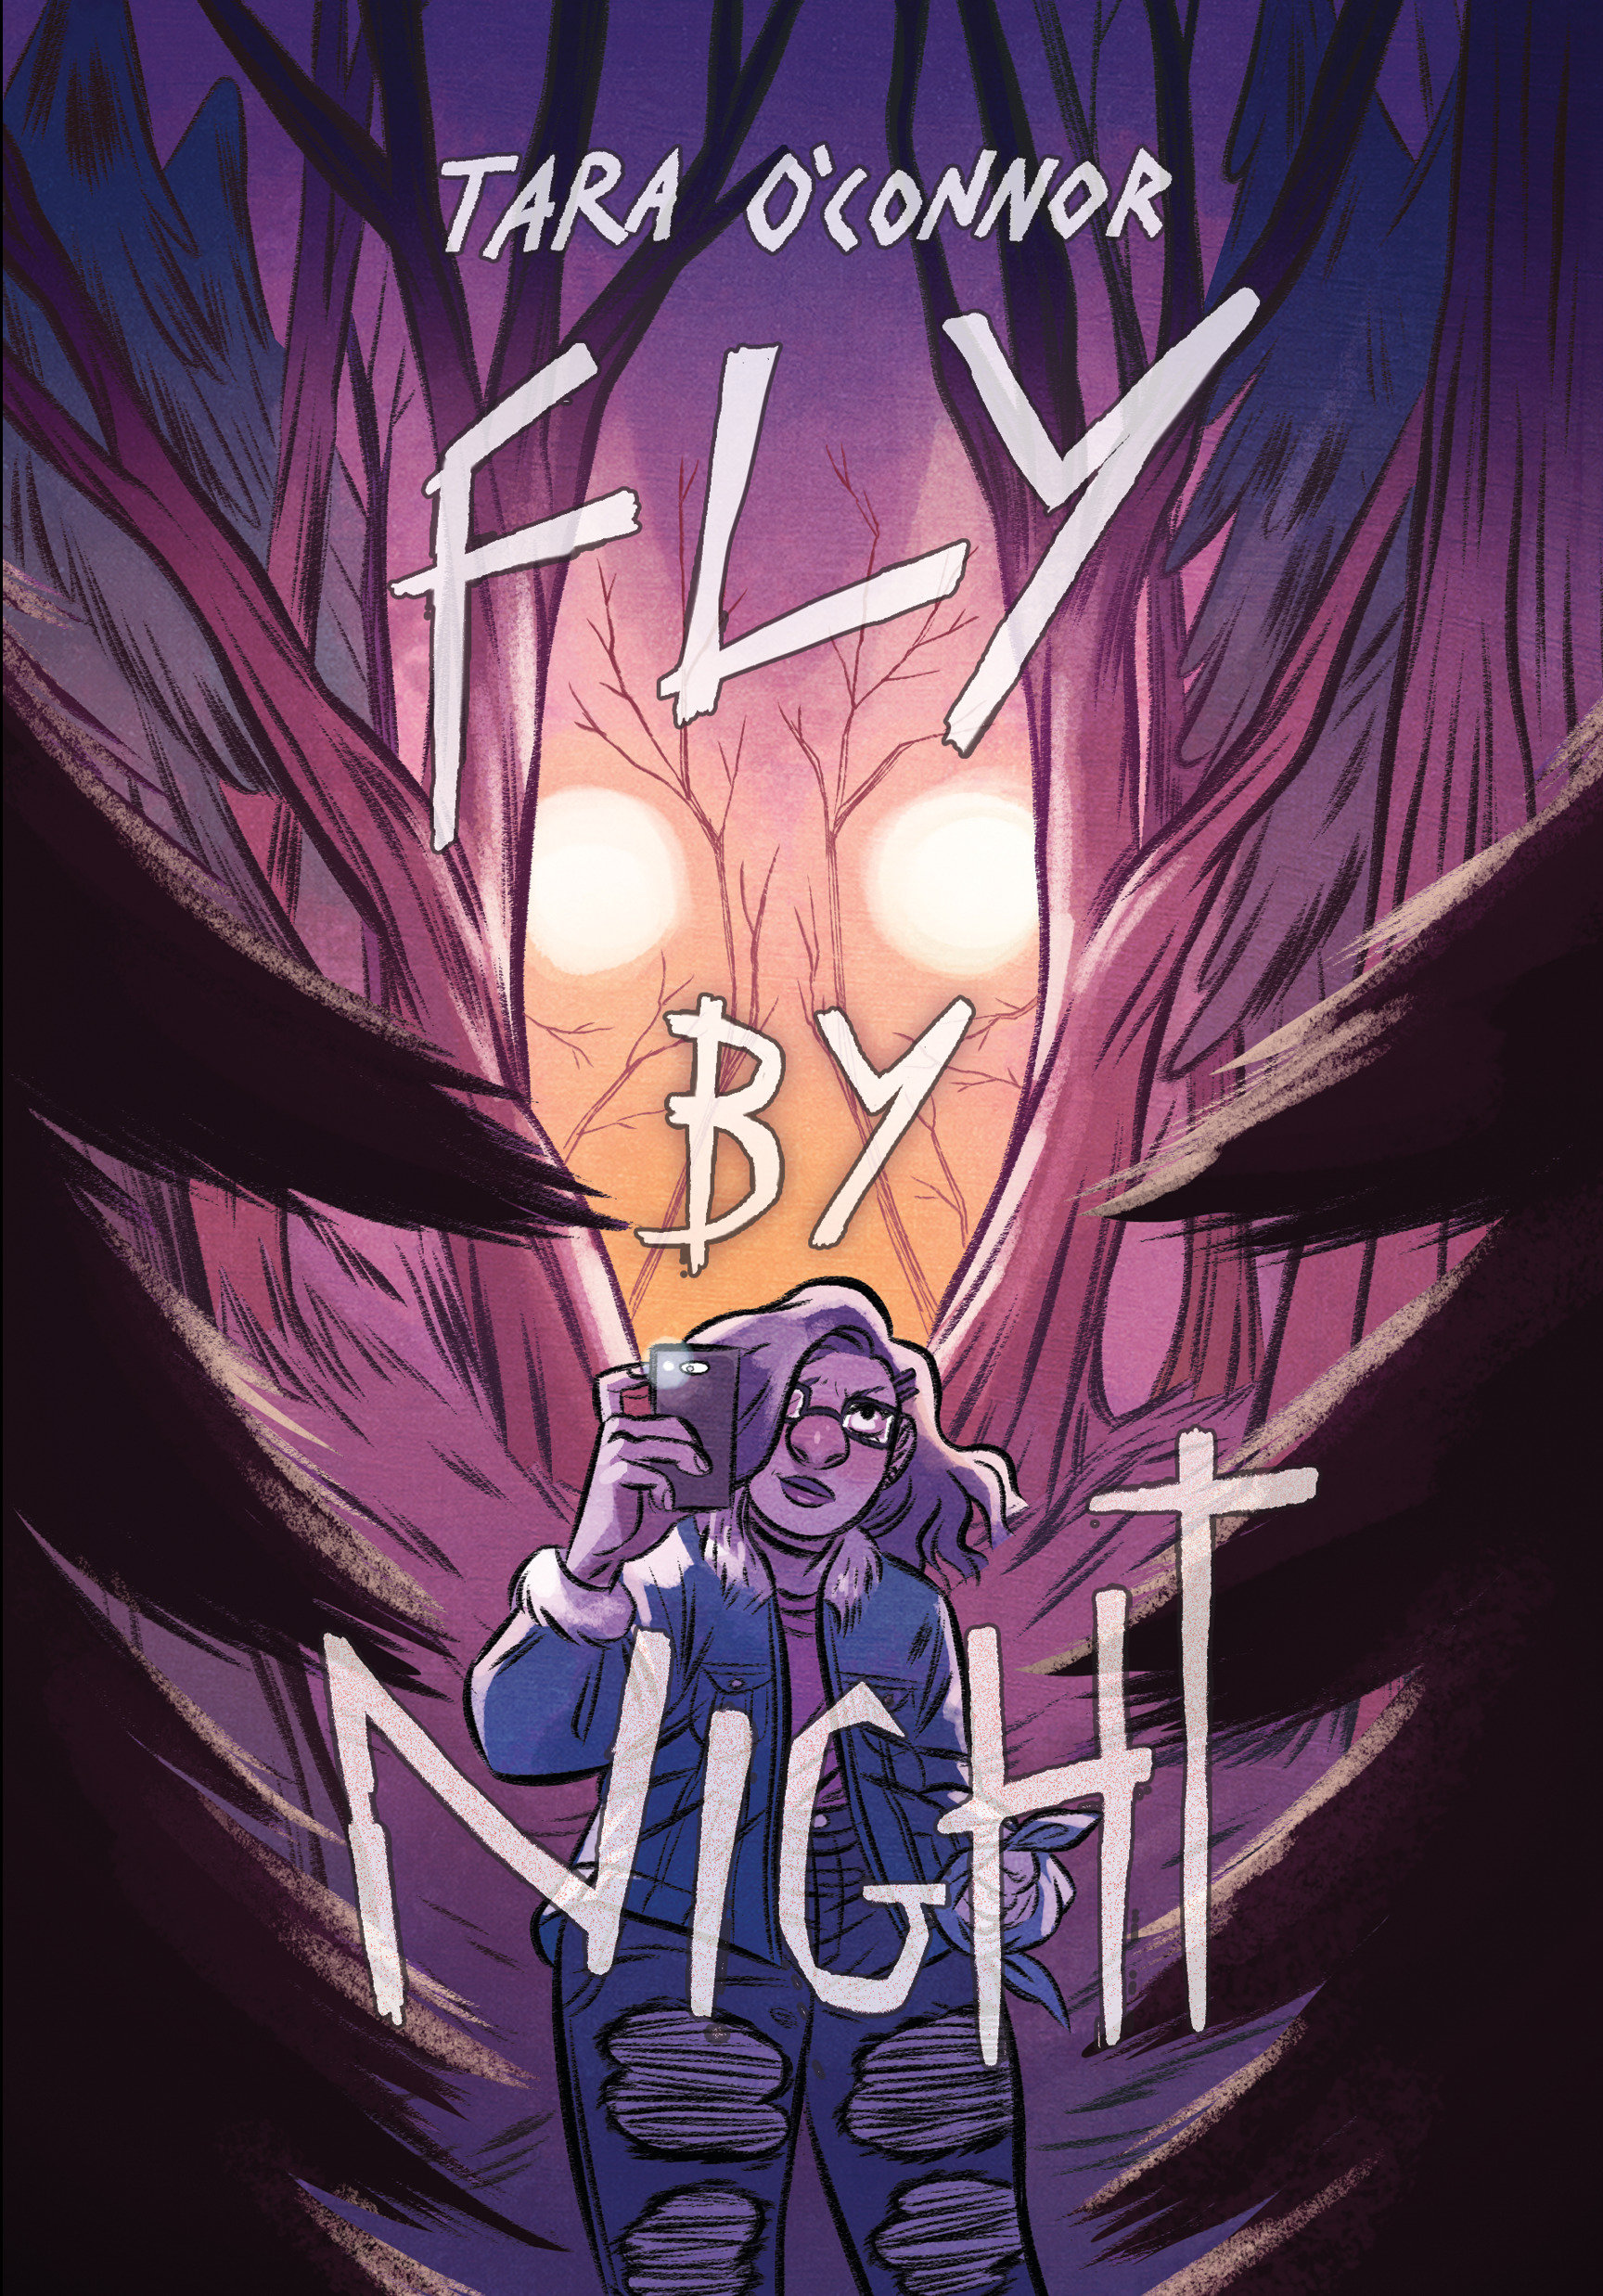 Fly by Night Graphic Novel